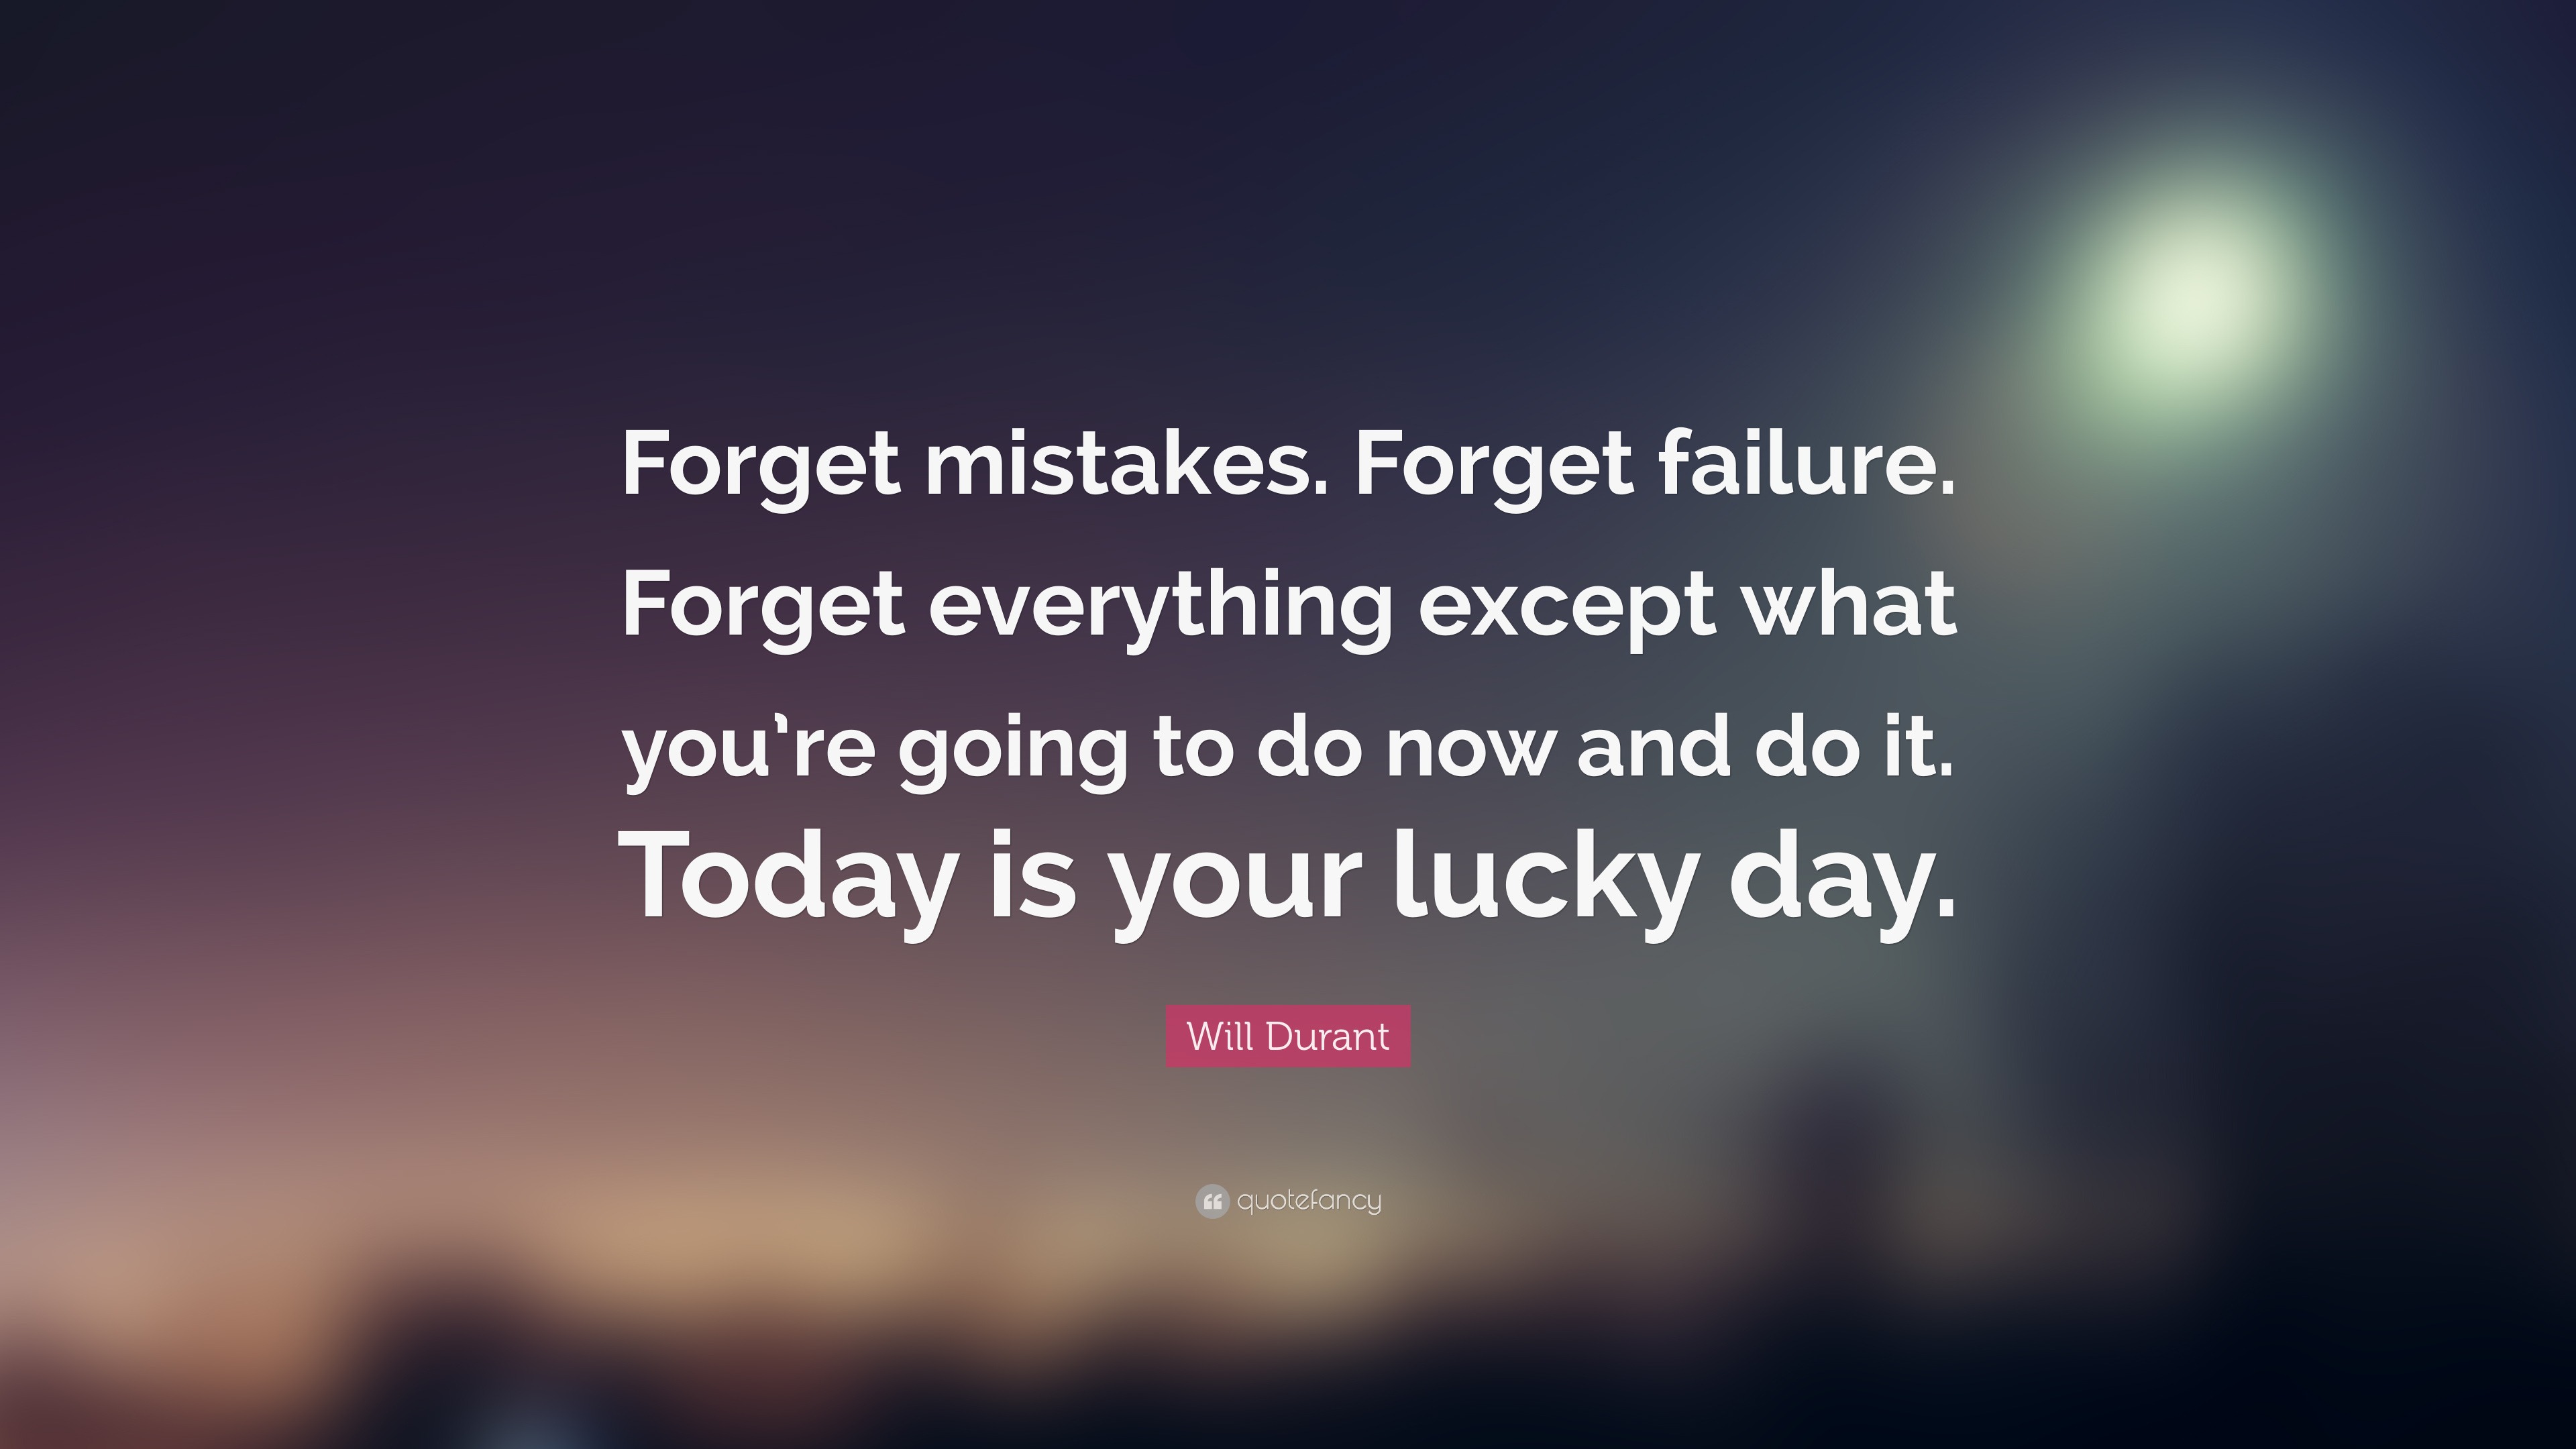 Will Durant Quote: “Forget mistakes. Forget failure. Forget everything ...